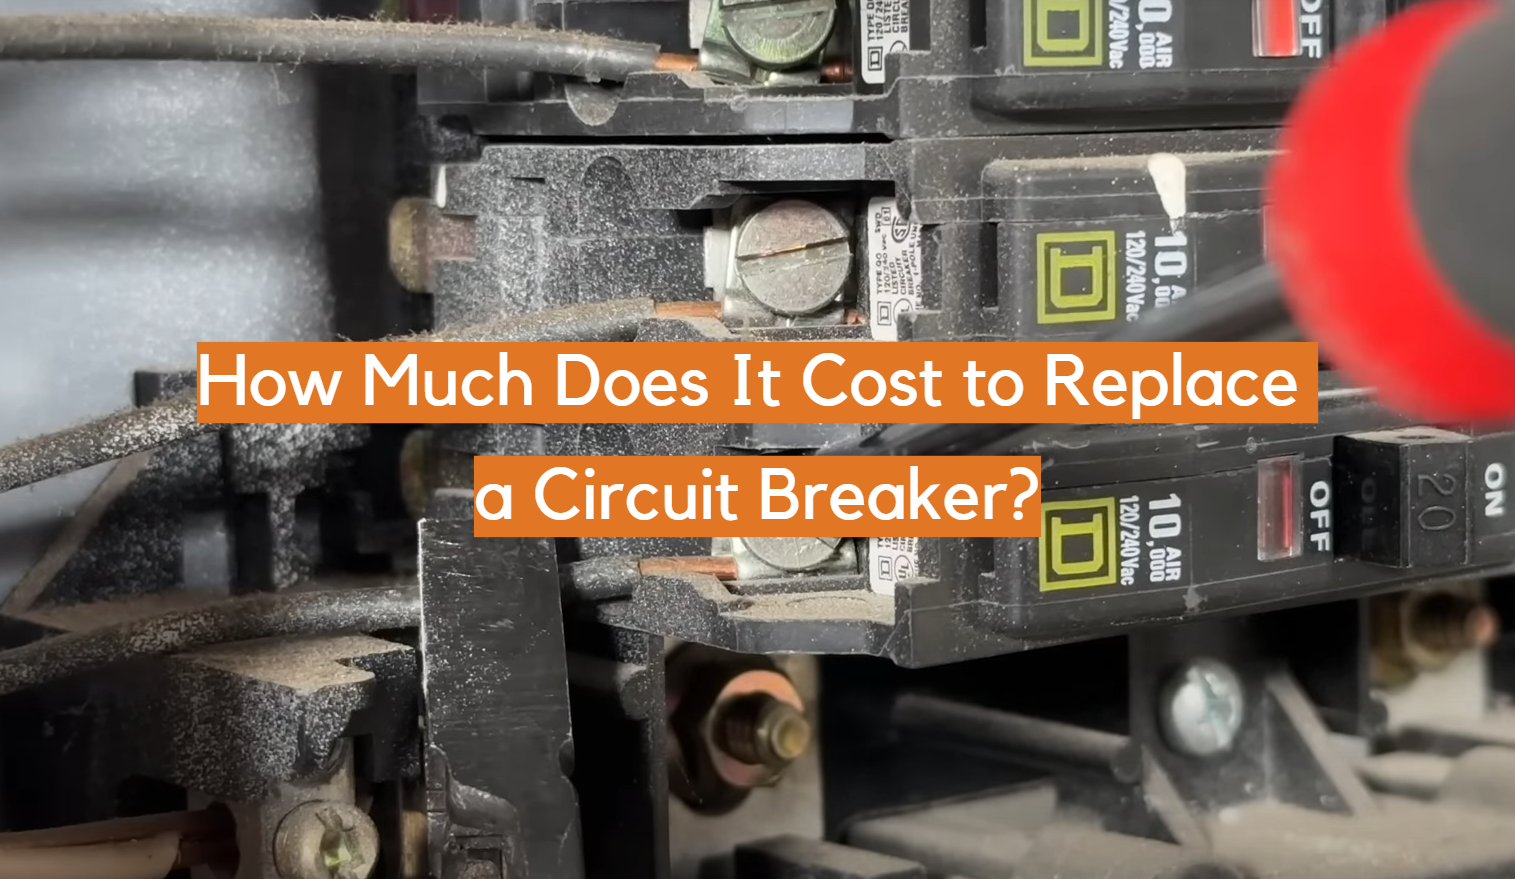 How Much Does It Cost to Replace a Circuit Breaker?